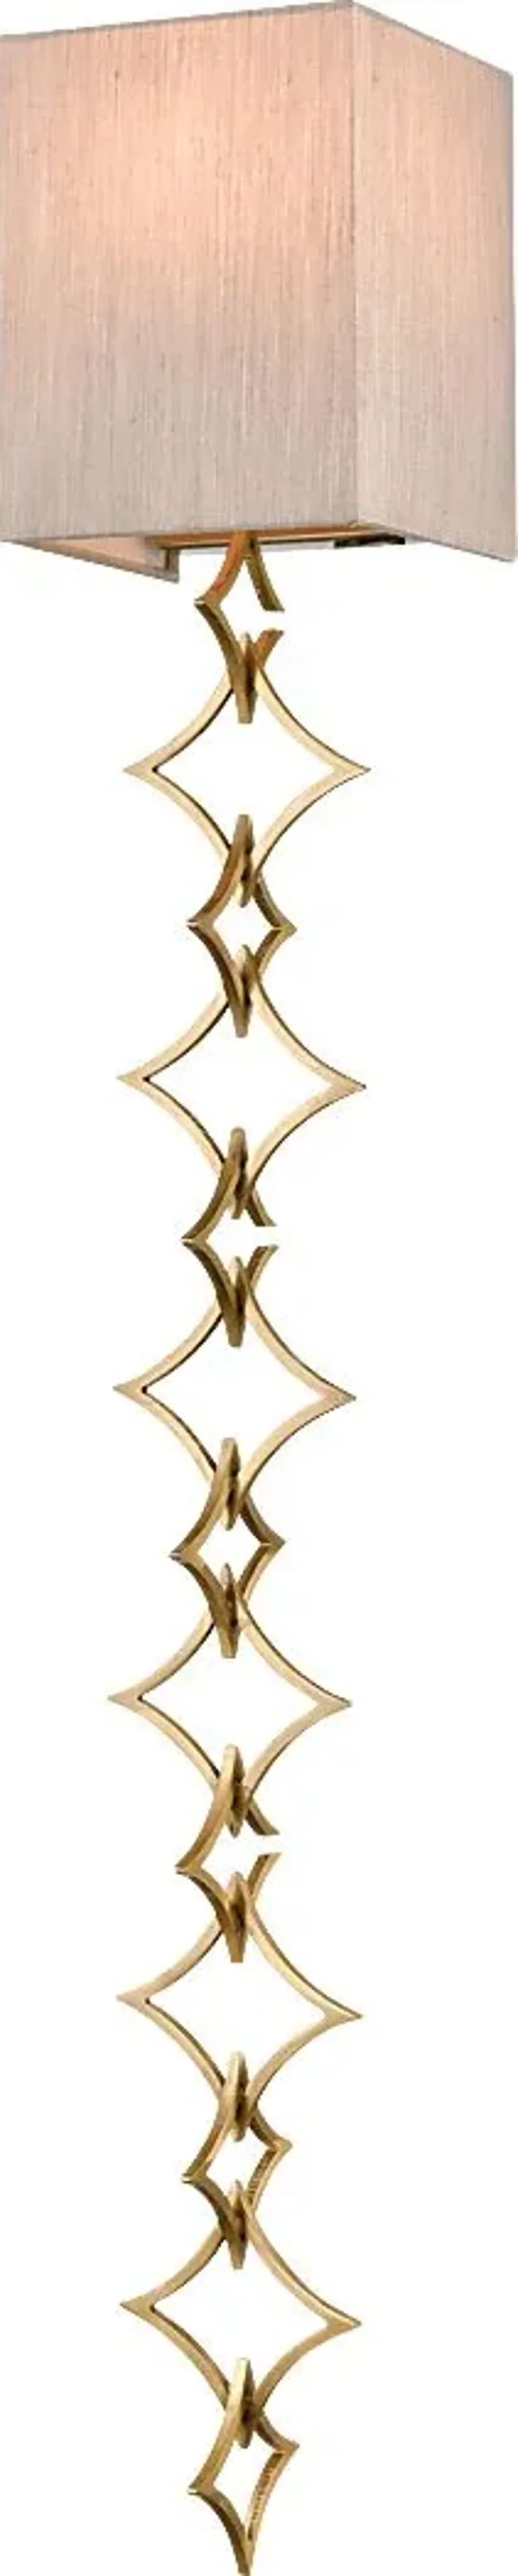 Towne Drive Brass Sconce